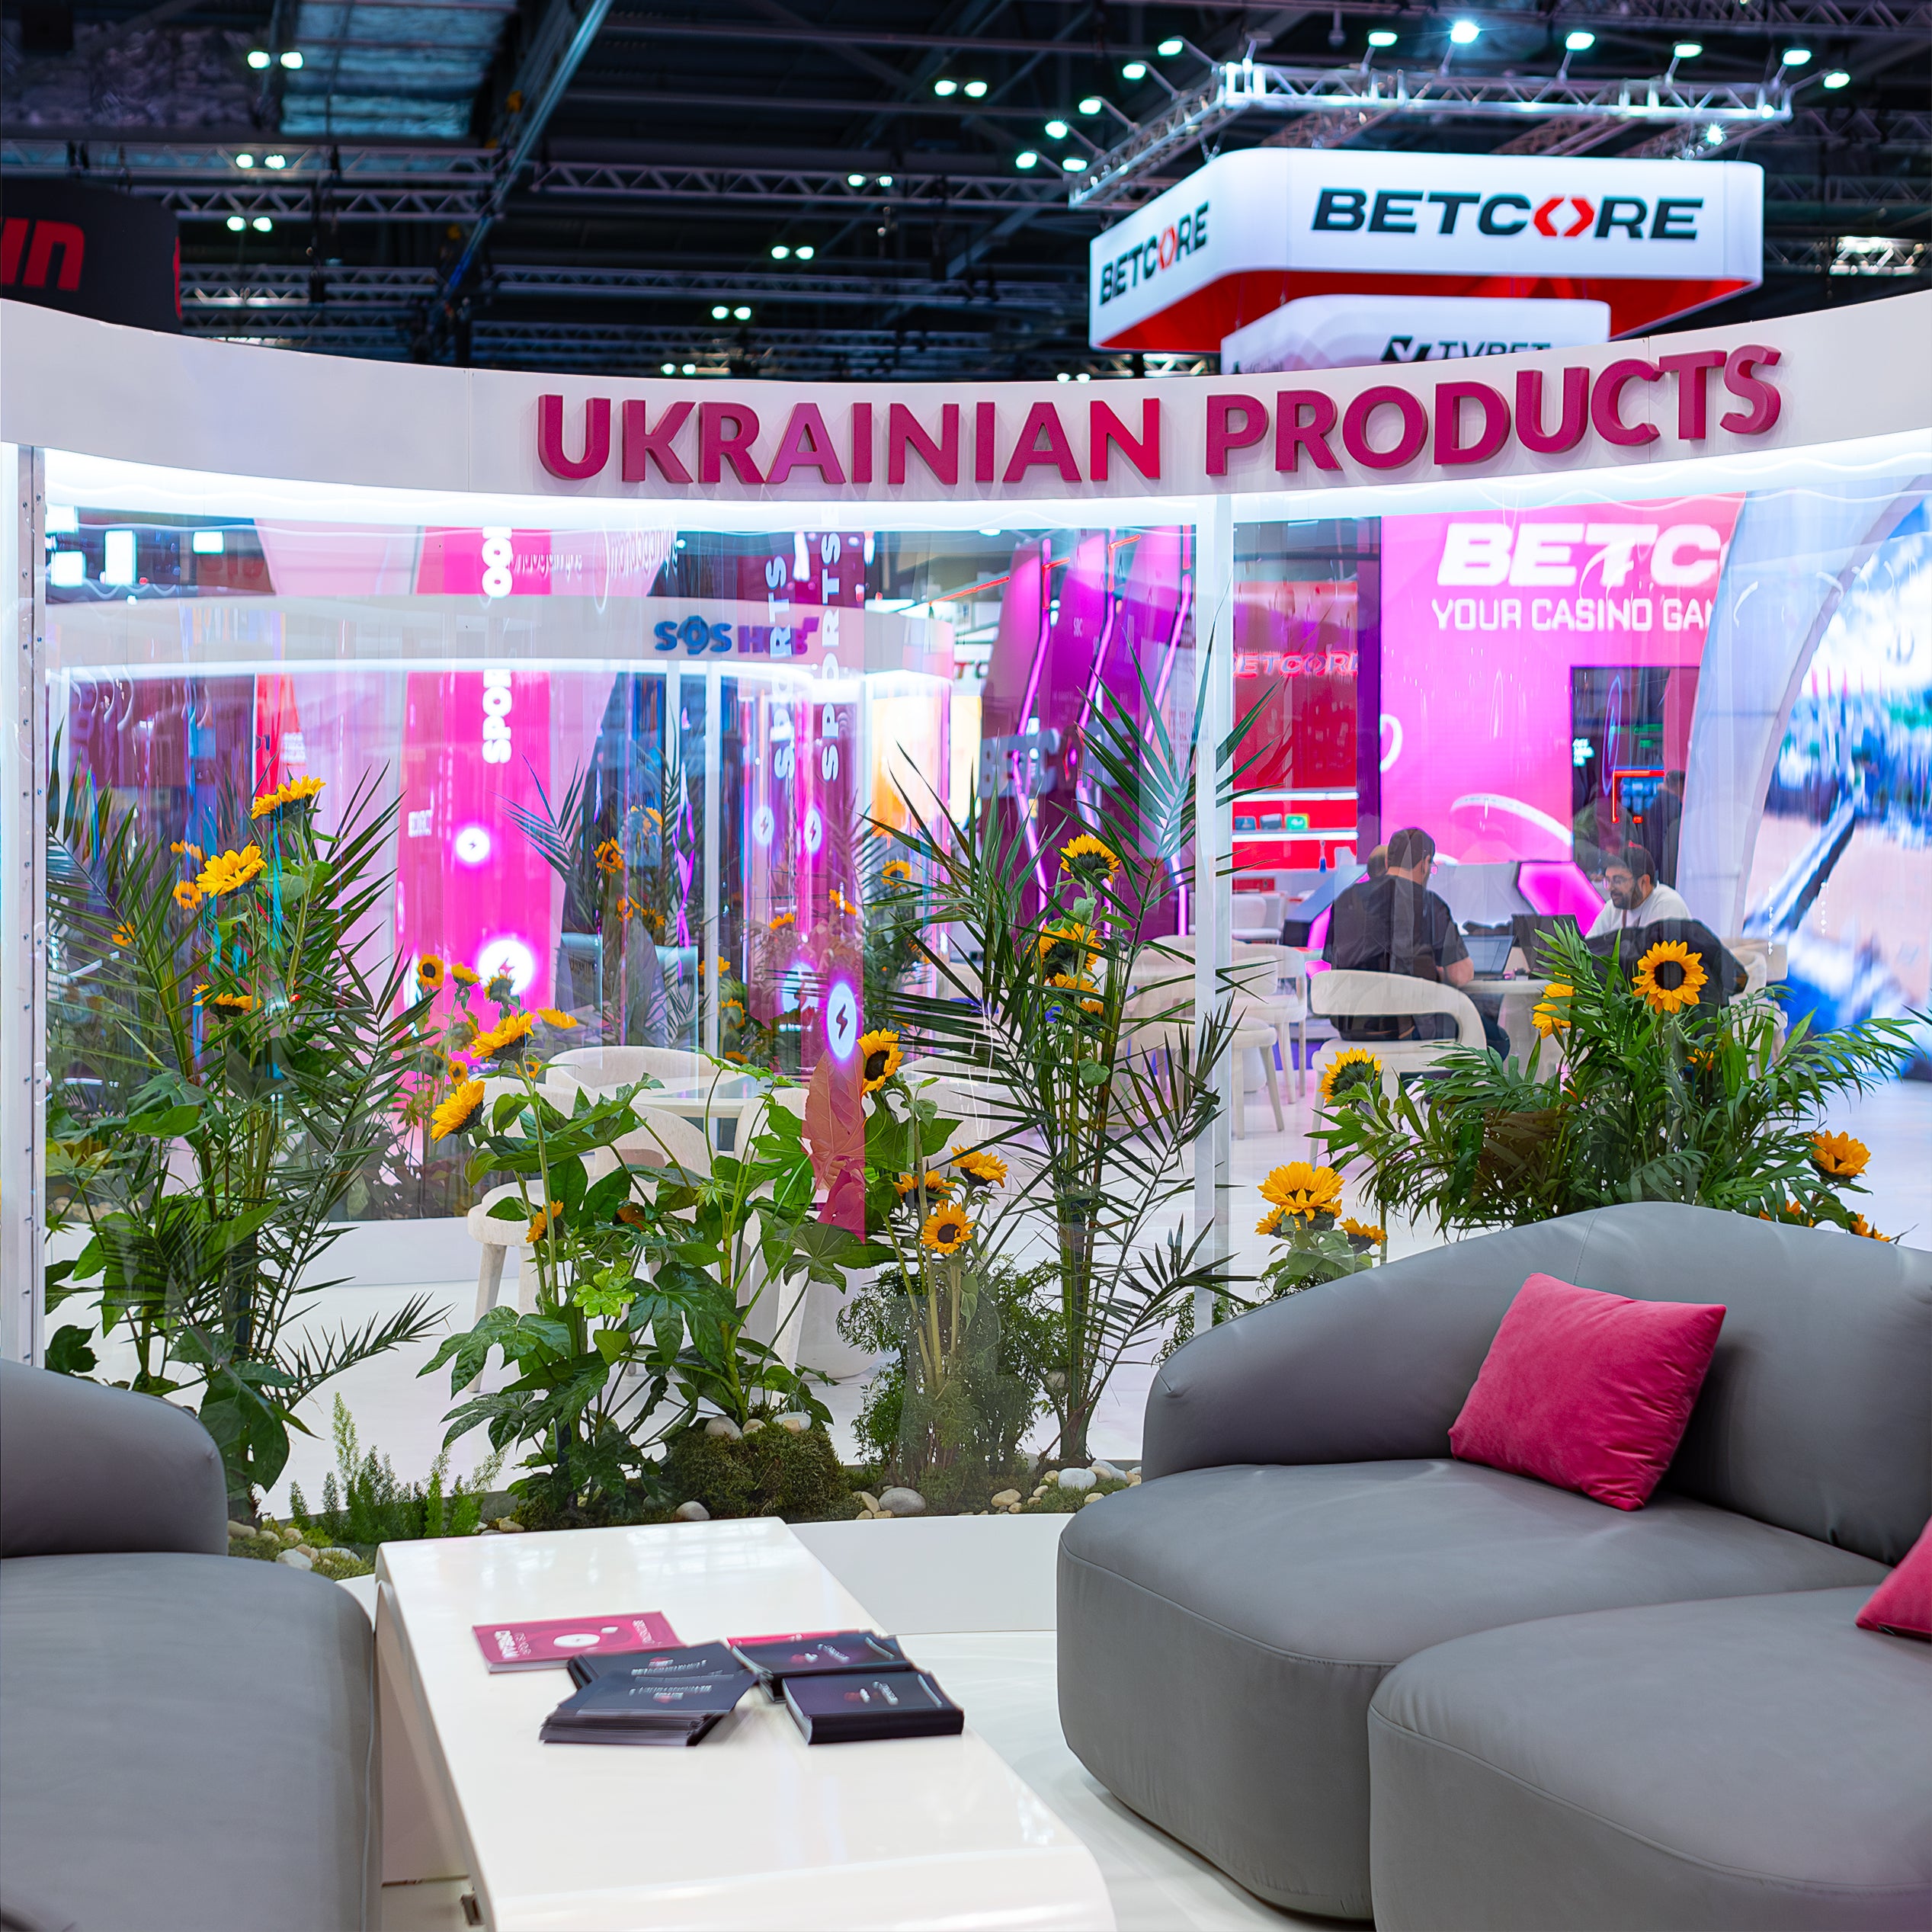 Stand with Ukrainian products branding in the background at the ICE London Exhibition decorated with a cheerful arrangement of sunflowers designed and produce by Amaranté Event Florist in London